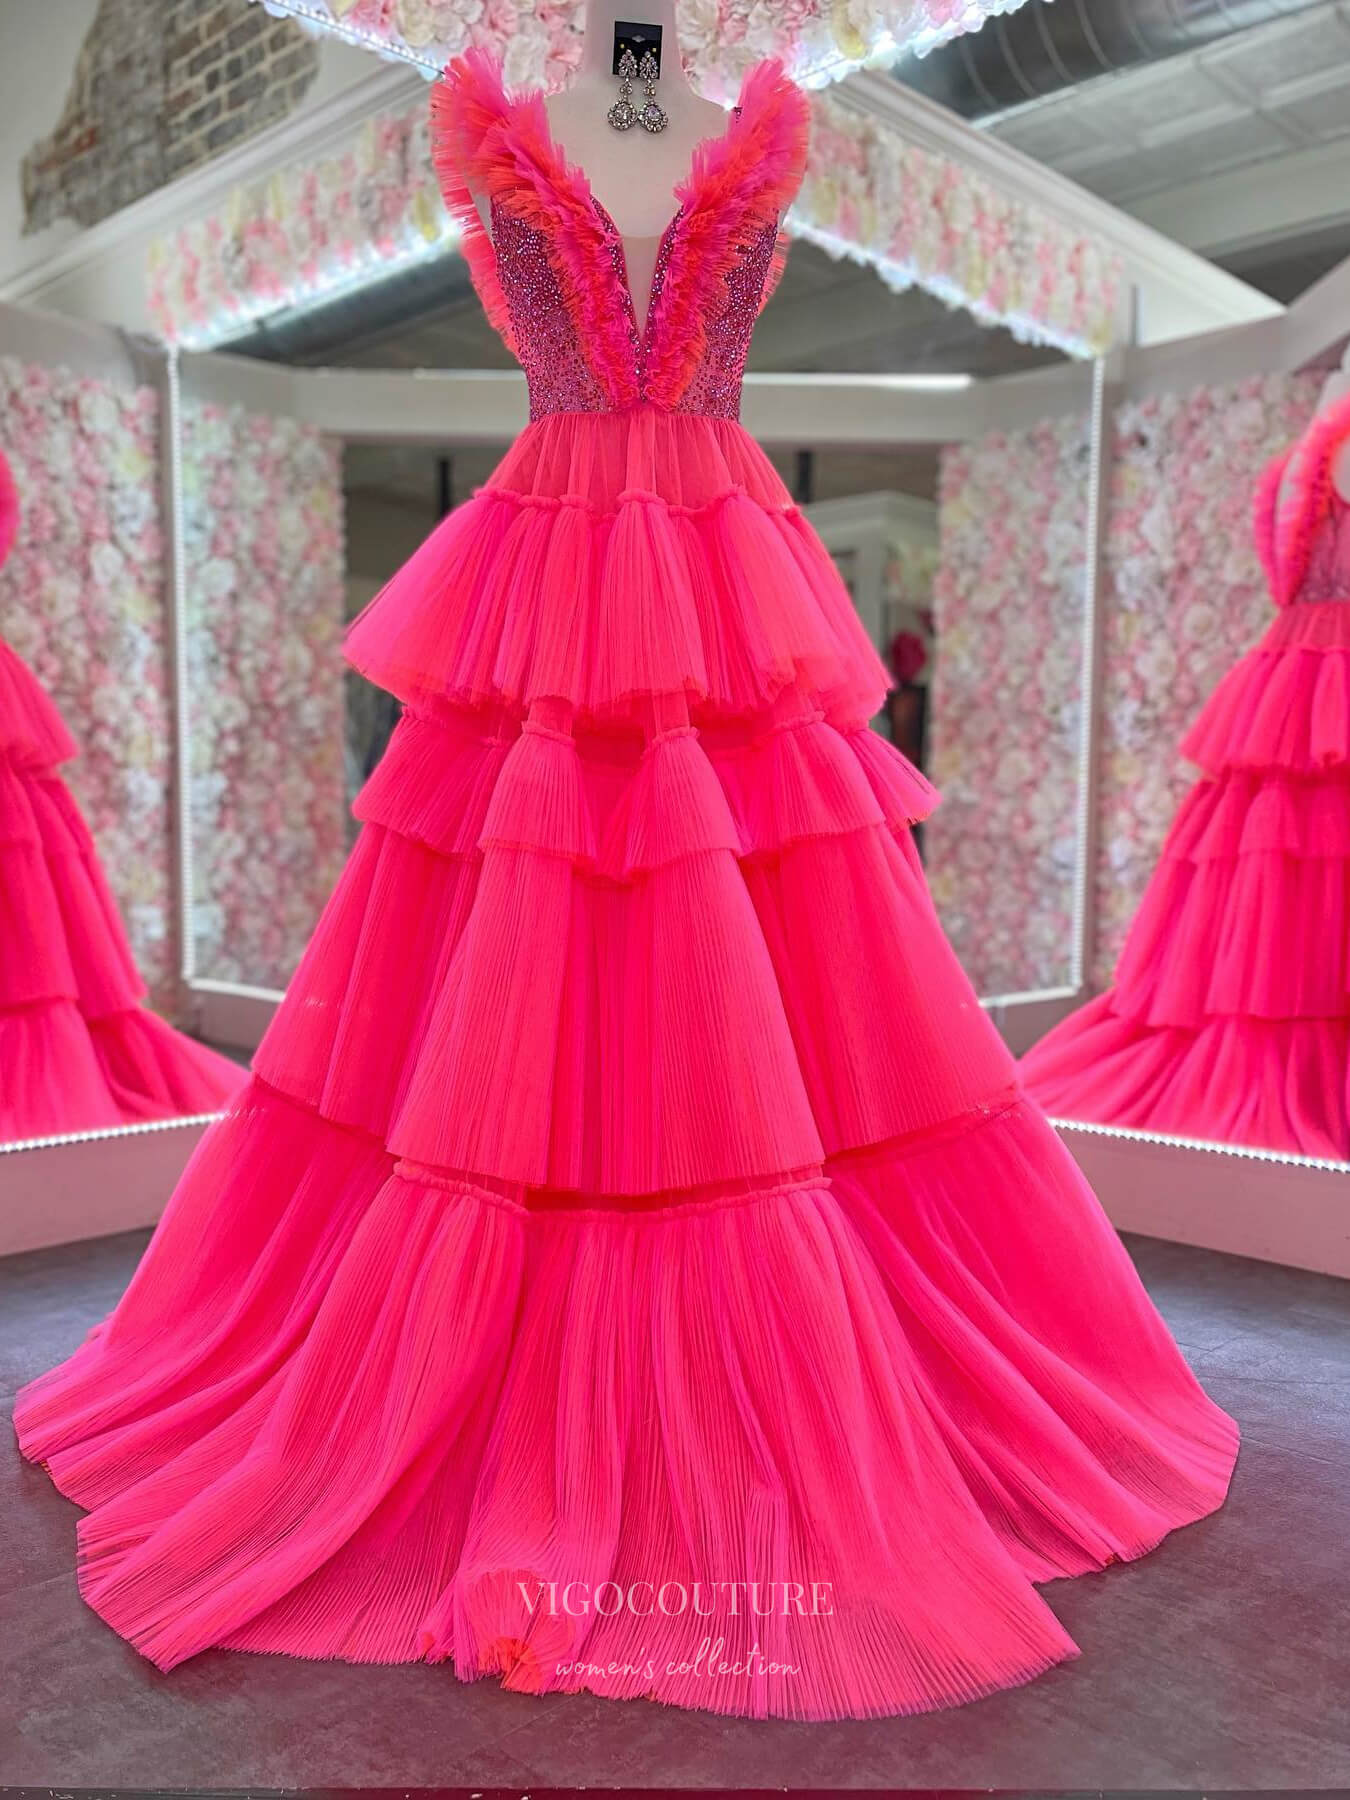 Ruffle Tiered A-Line Prom Dresses Plunging V-Neck Beaded Bodice 24151-Prom Dresses-vigocouture-Hot Pink-Custom Size-vigocouture